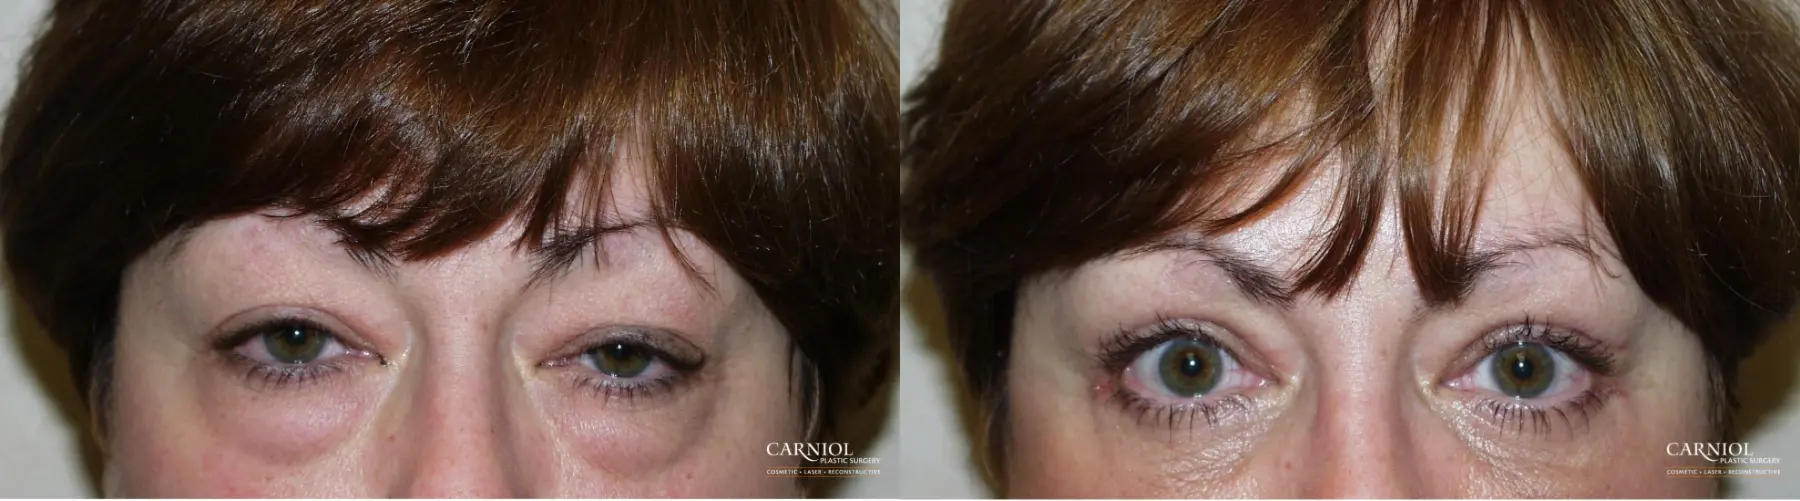 Eyelid Lift: Upper and Lower Blepharoplasty - Before and After 1